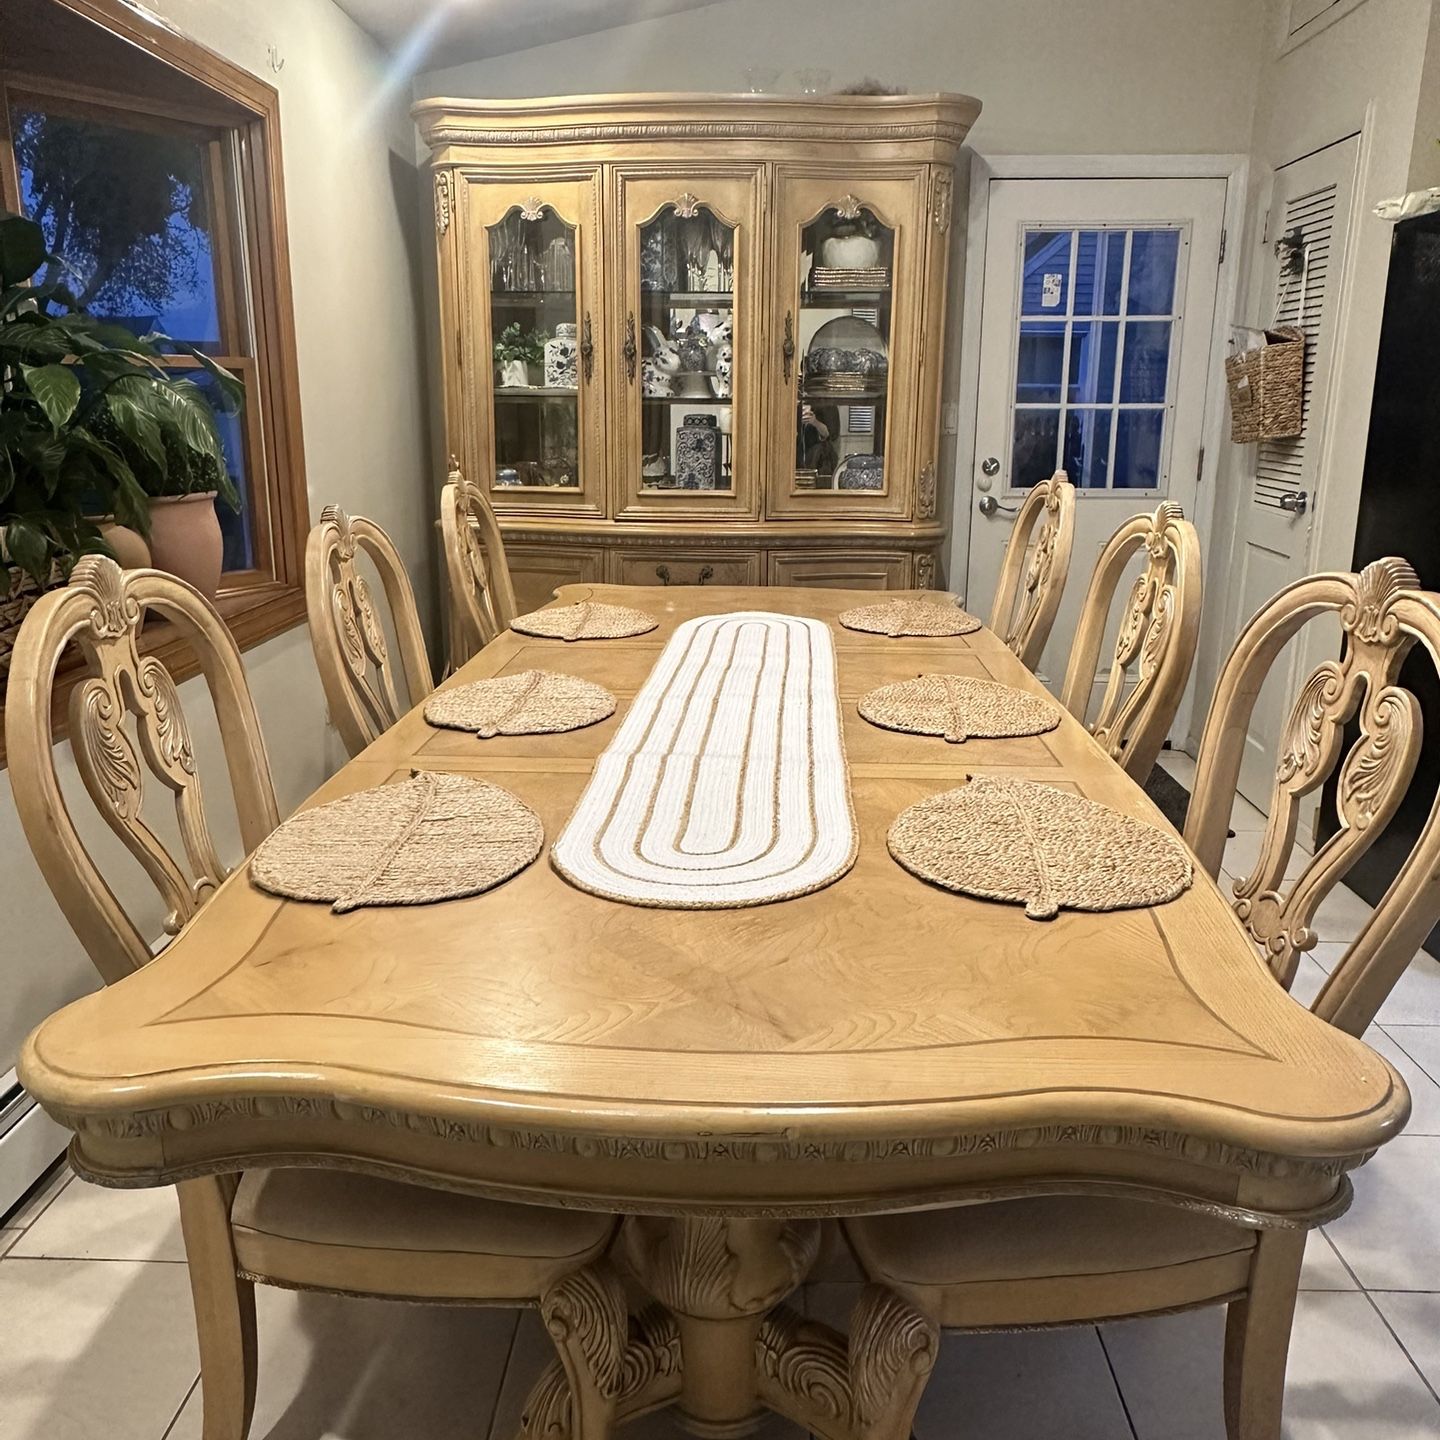 DINING TABLE, 6 CHAIRS, & CHINA CABINET